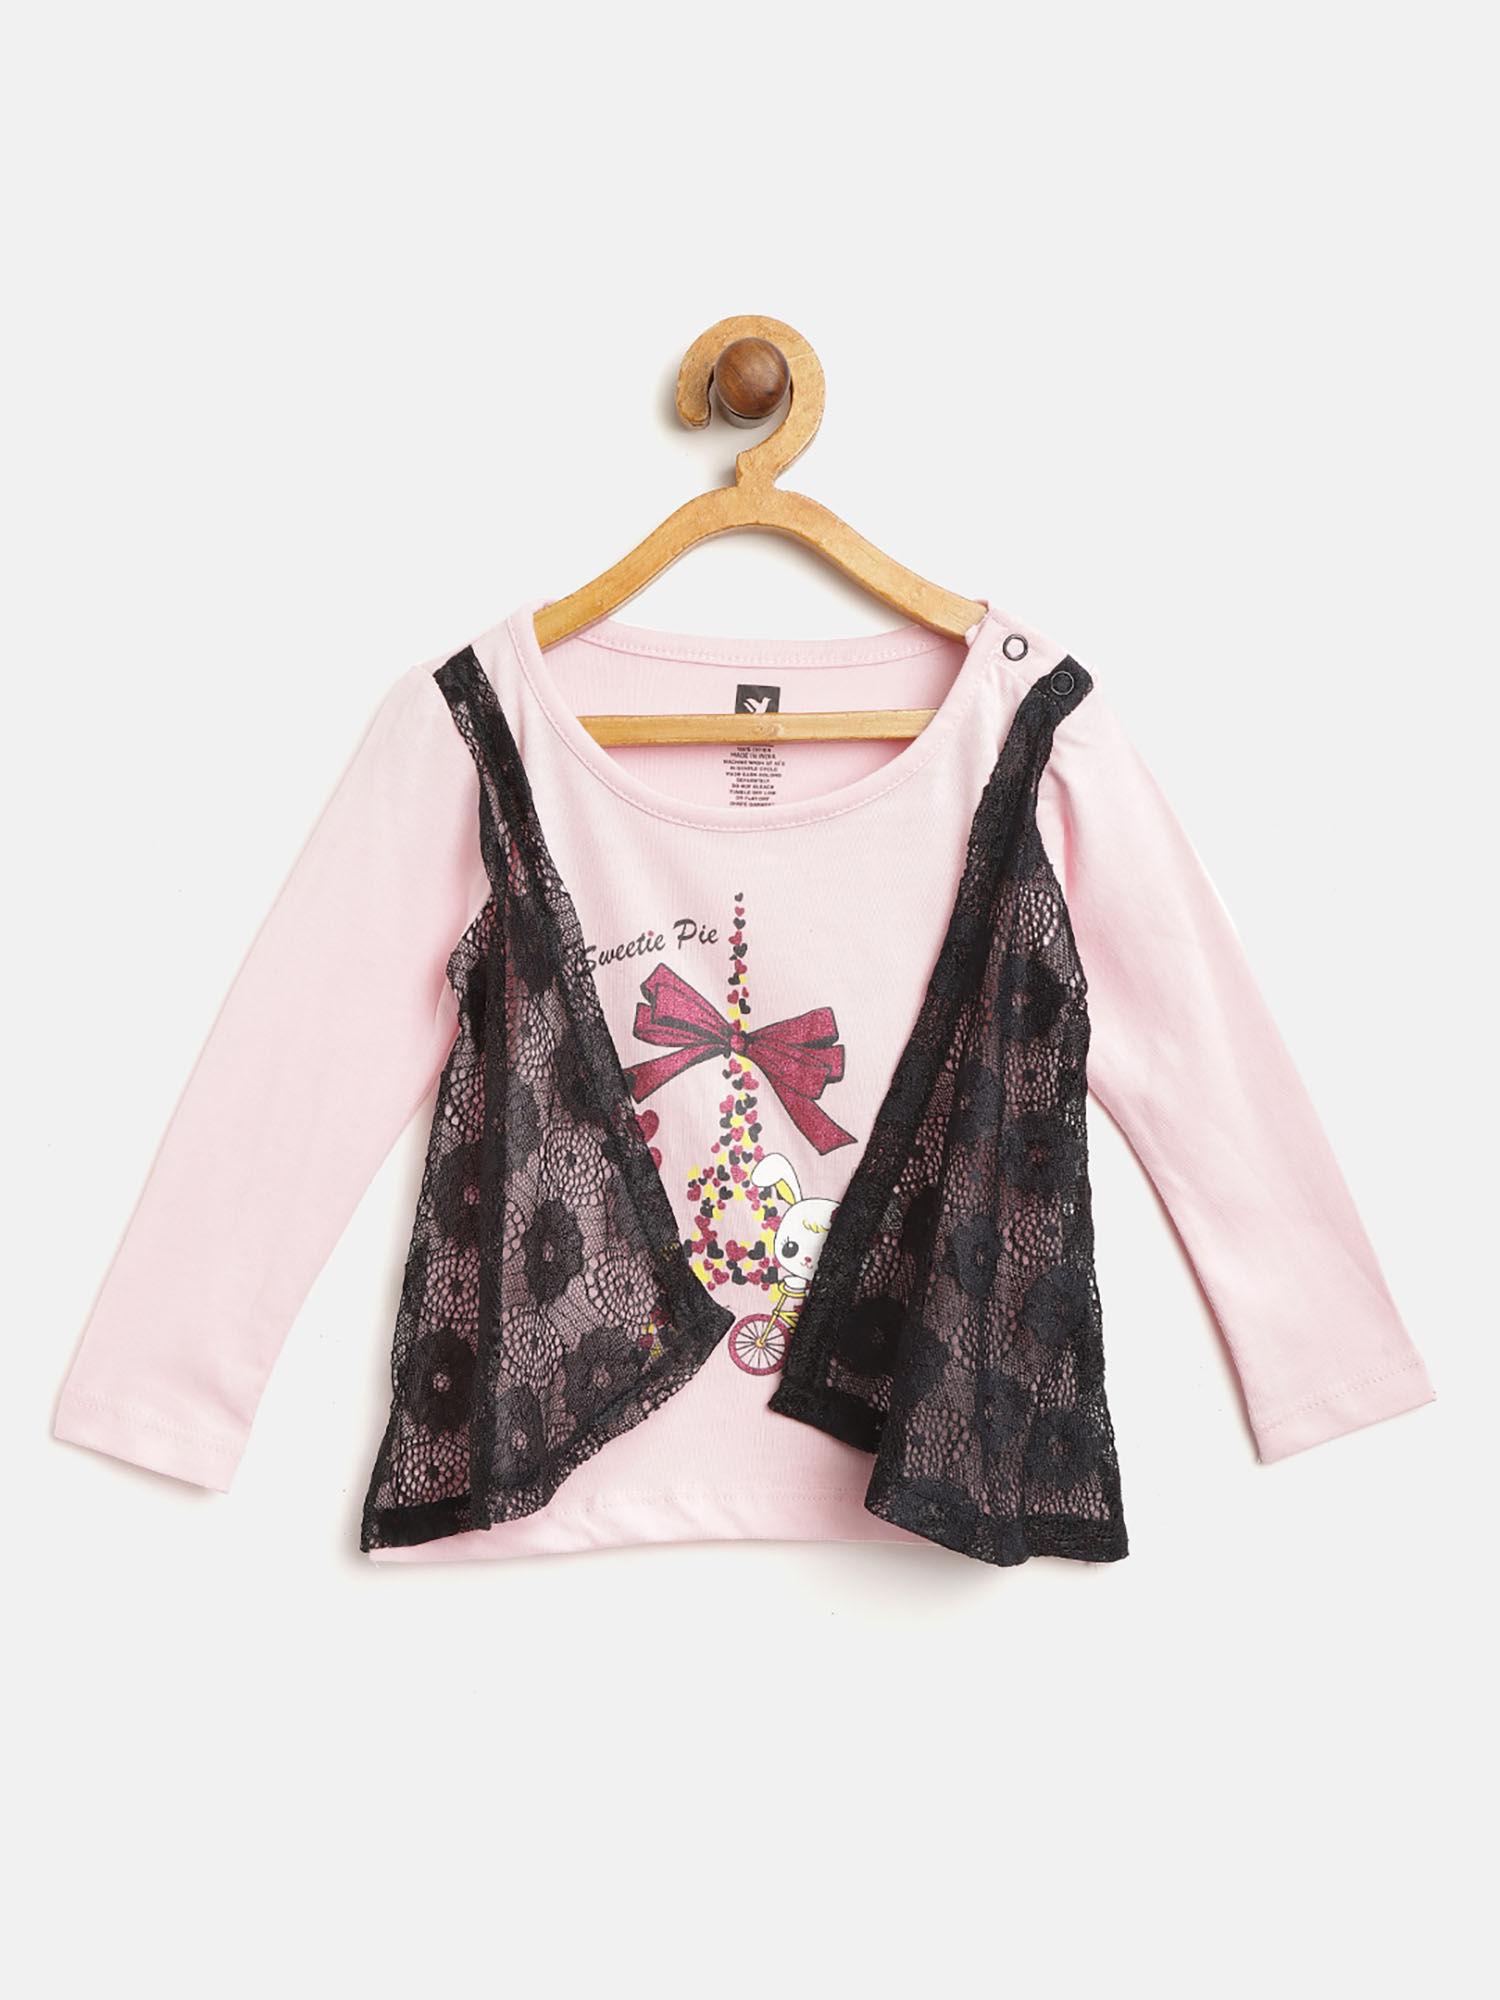 girl's sweetie pie t-shirt with lace shrug in pink